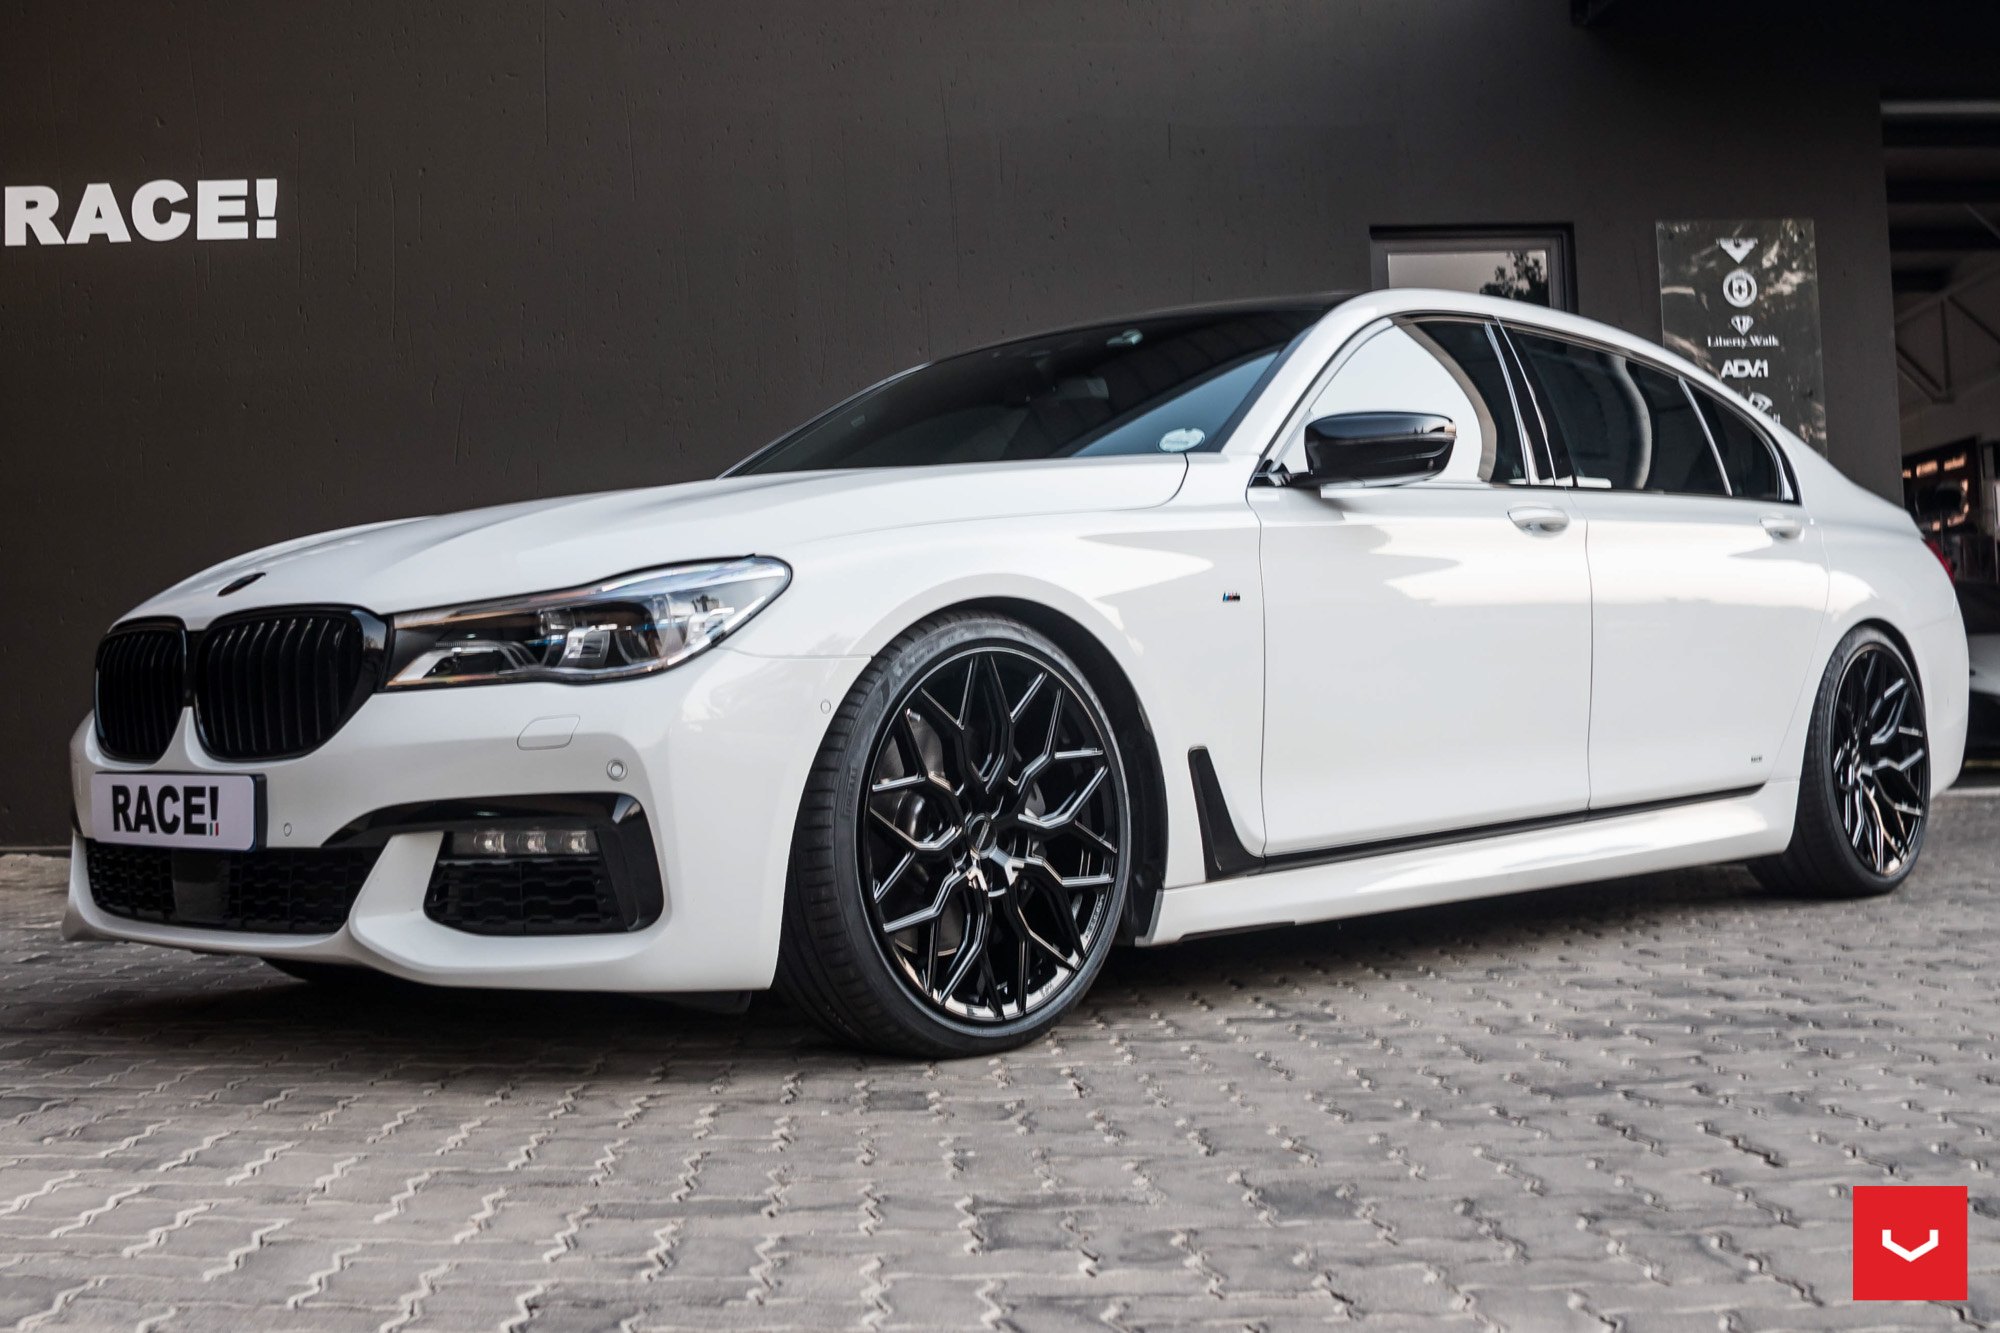 Aftermarket Projector Headlights on White BMW 7-Series - Photo by Vossen